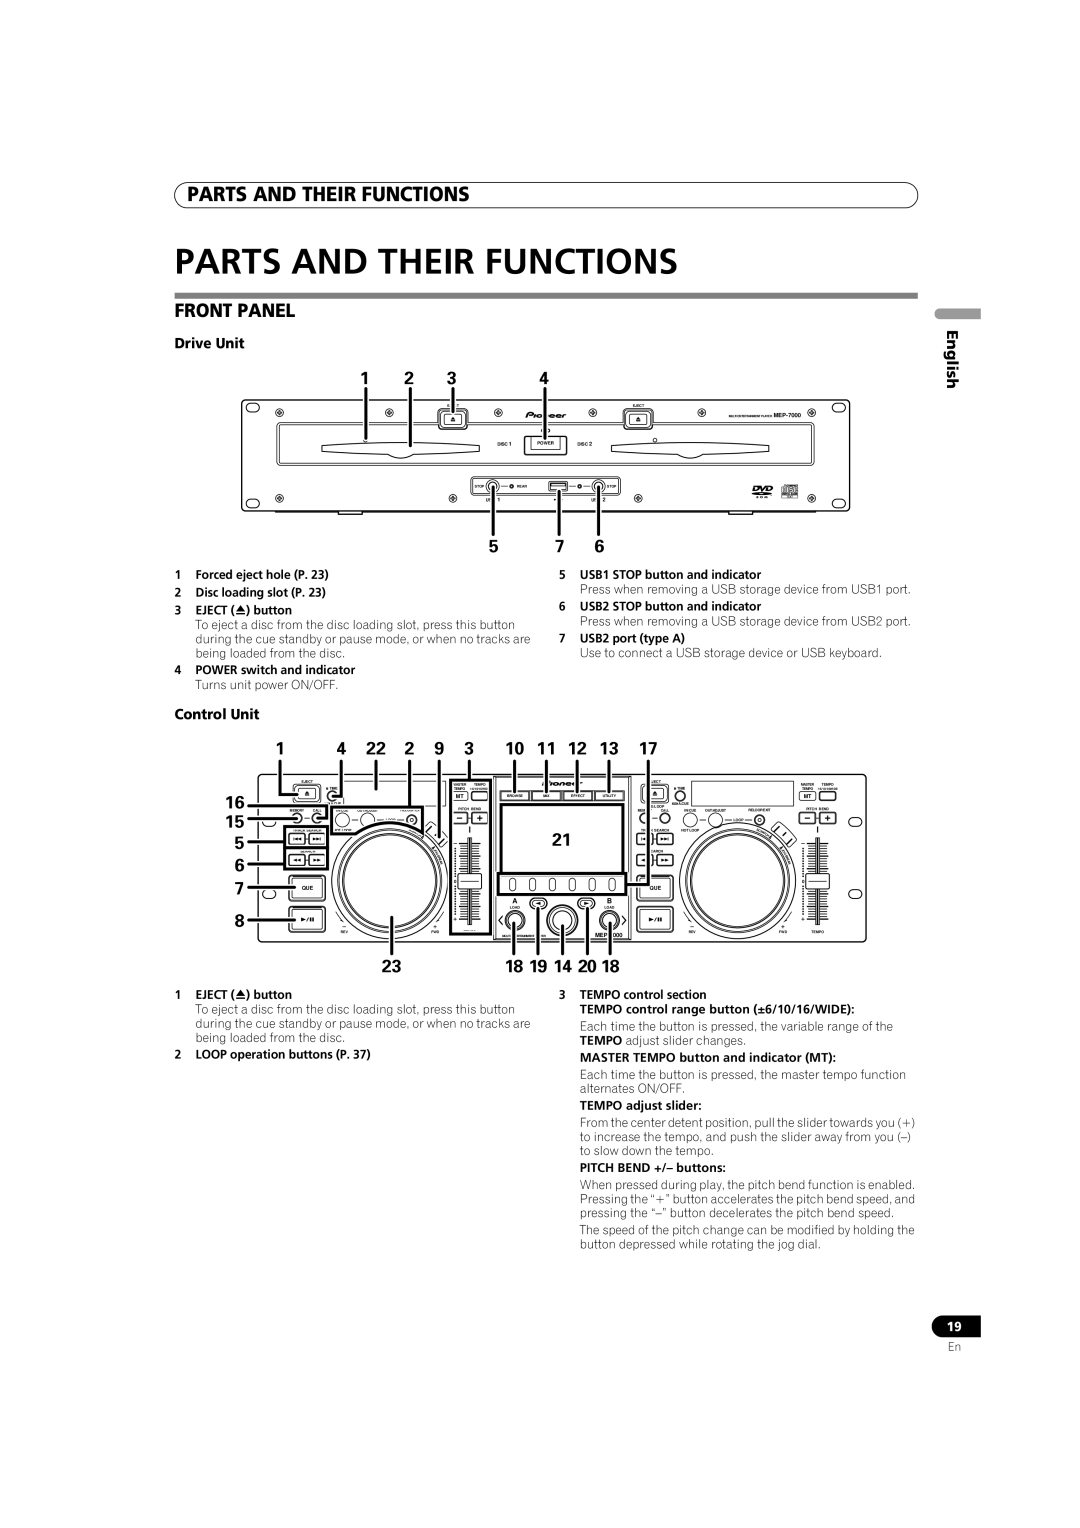 Pioneer MEP-7000 operating instructions Parts And Their Functions, Front Panel, 16 15 5 6 8, 1 4 22 2, 18 19 14 20 